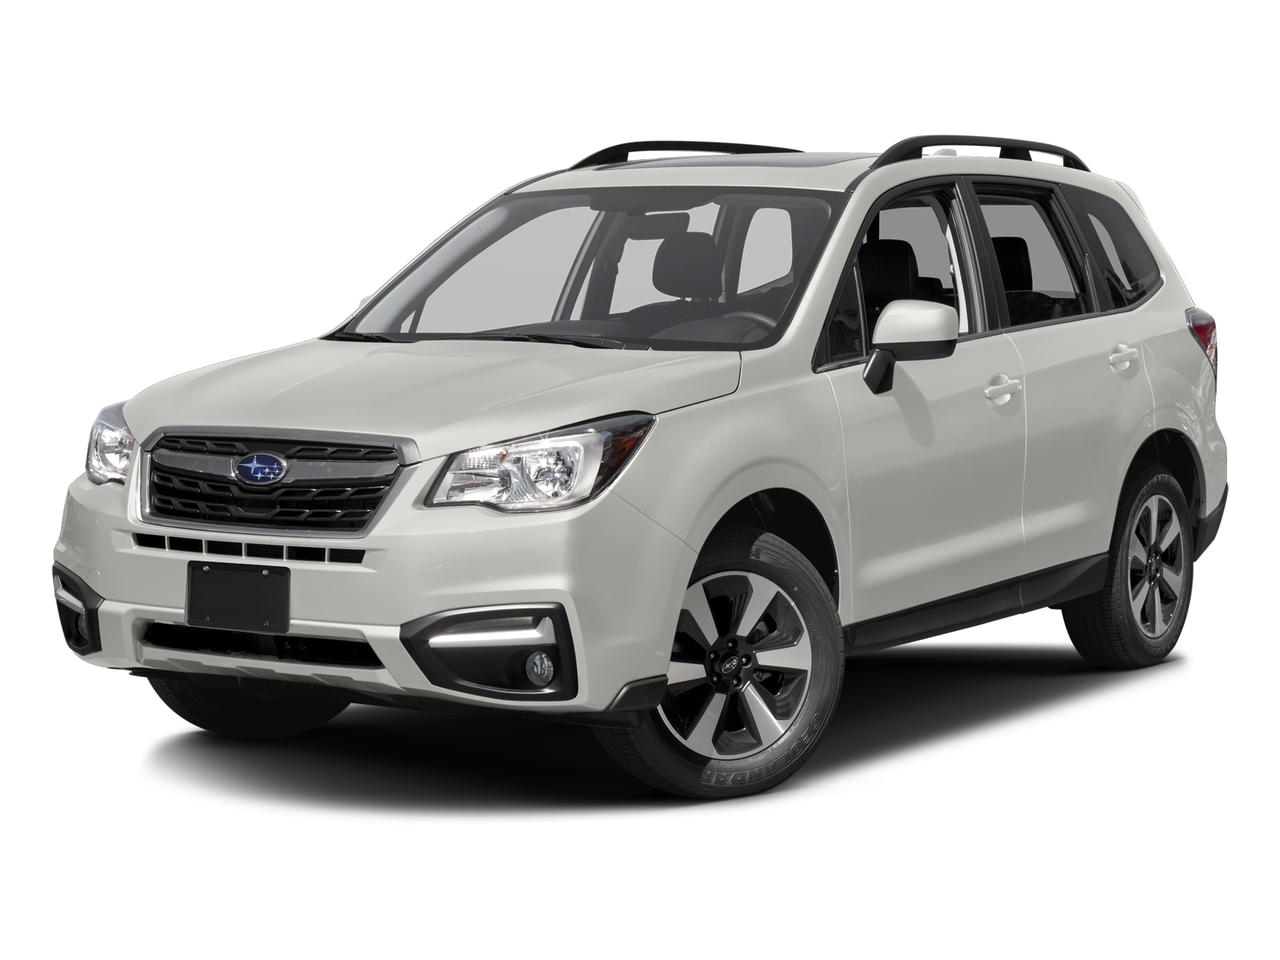 2017 Subaru Forester Limited - Tech